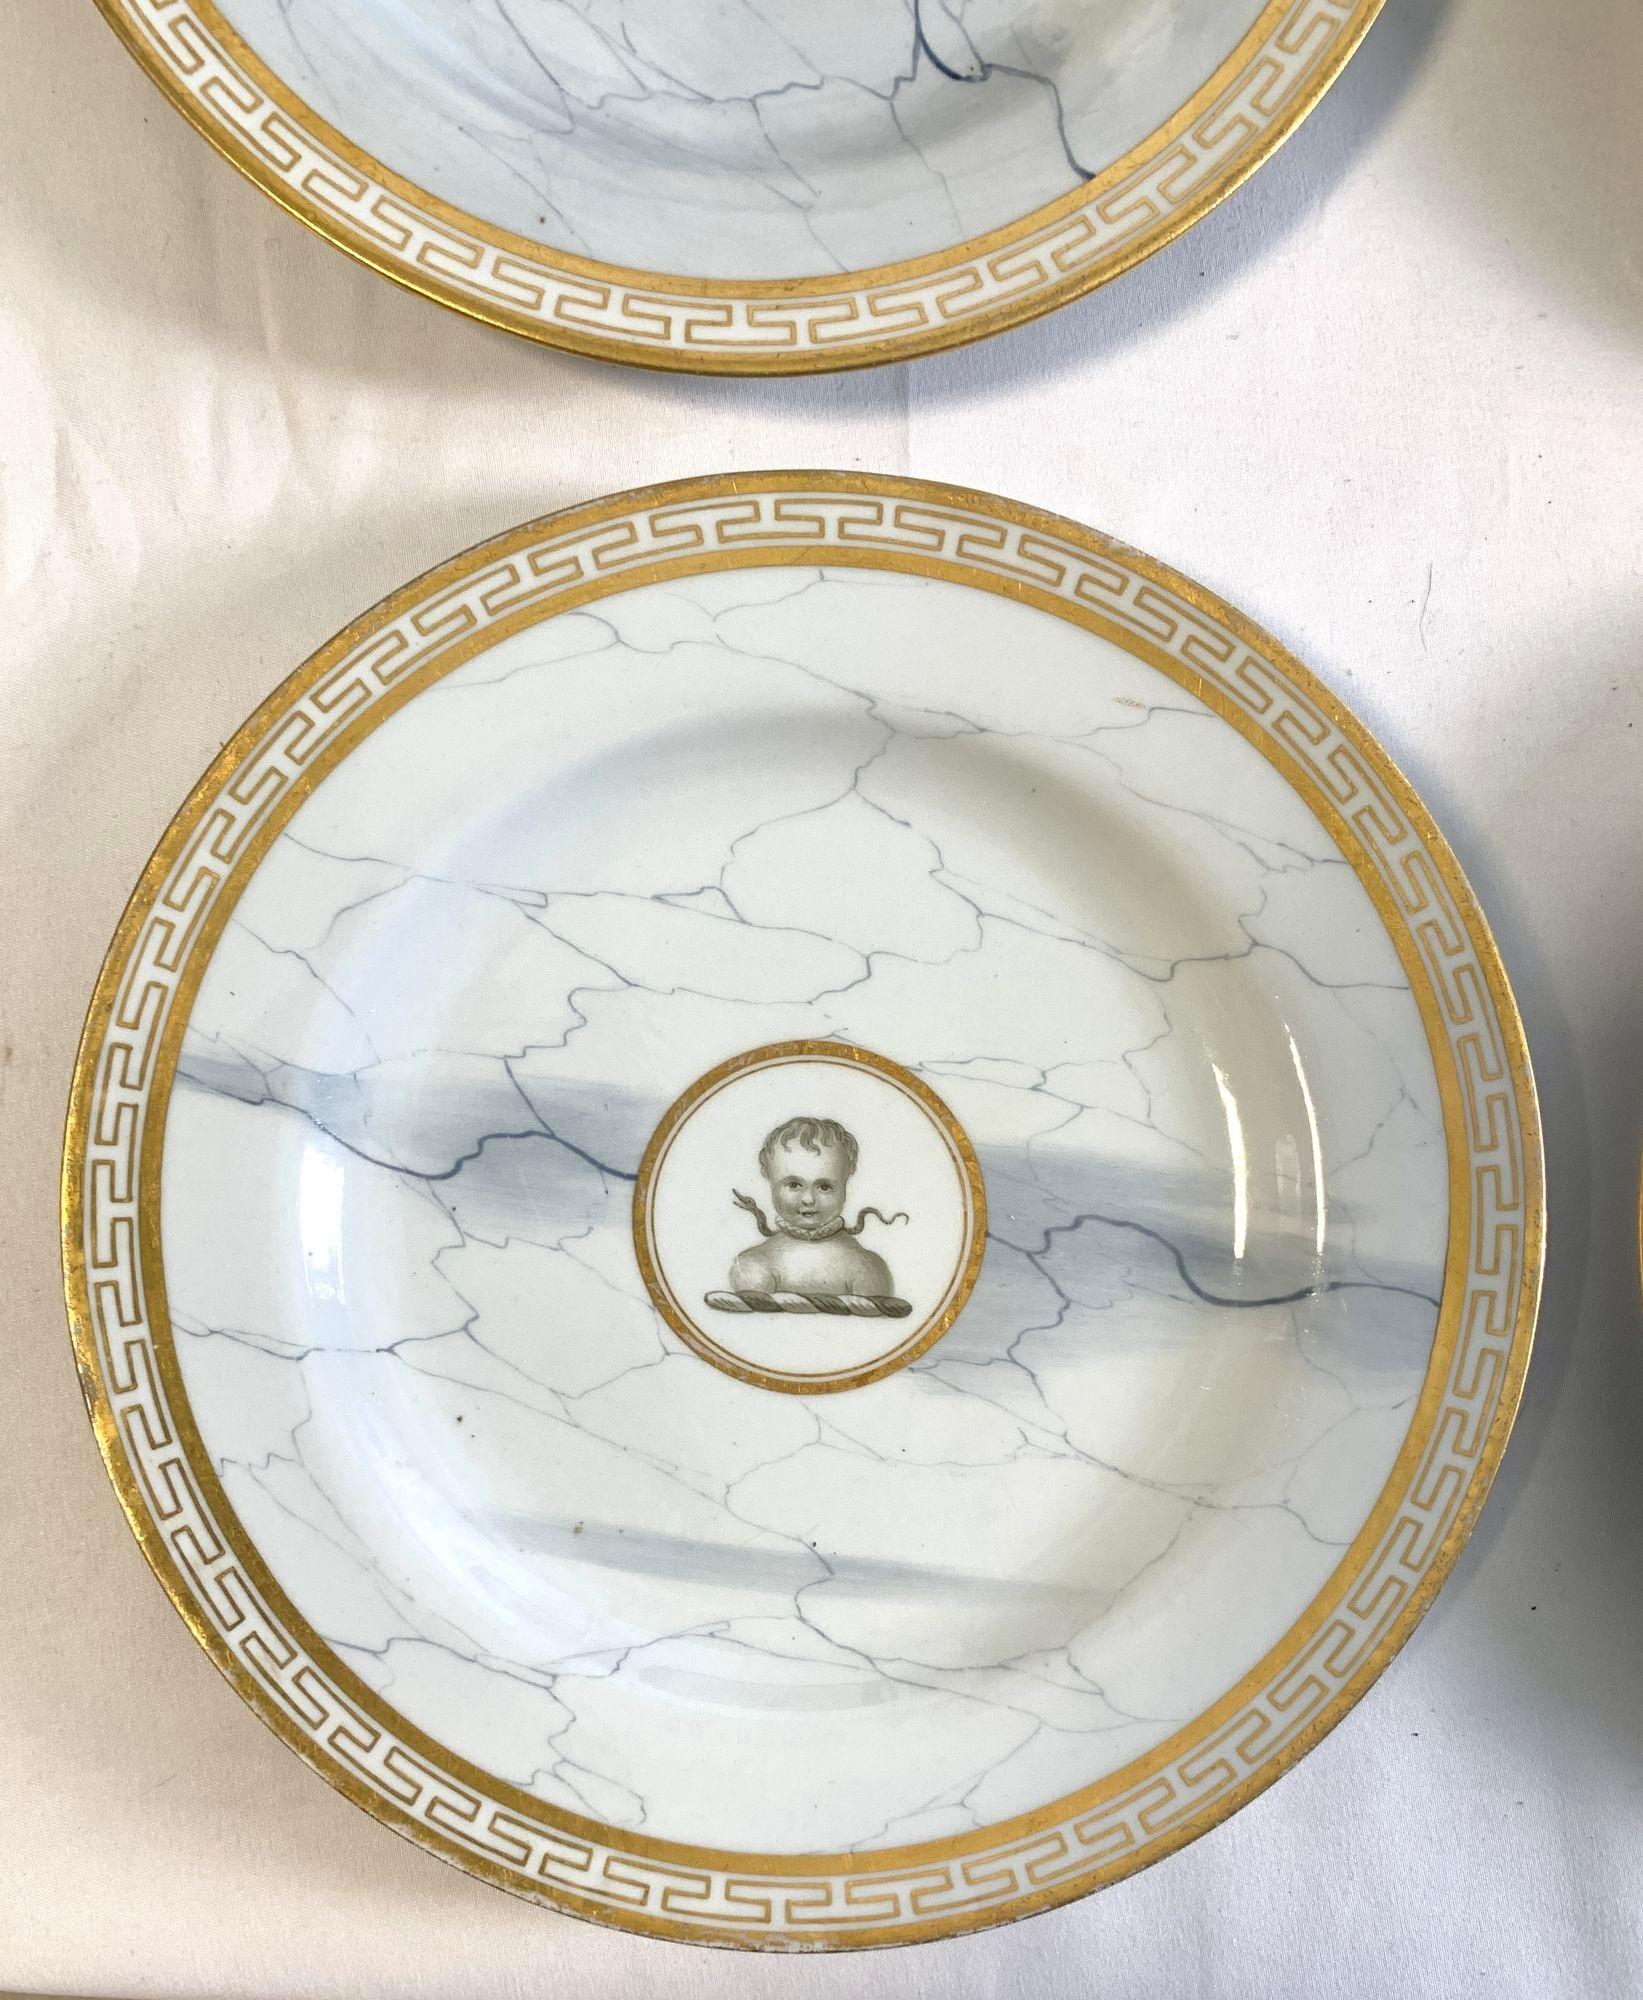 This is a set of six Barr Flight Barr Worcester dishes that were hand-painted in Worcester, England, around 1805.
Each dish has a diameter of 8.15 inches.
They're in very good condition, with just a few dishes showing slight rubbing on the outside